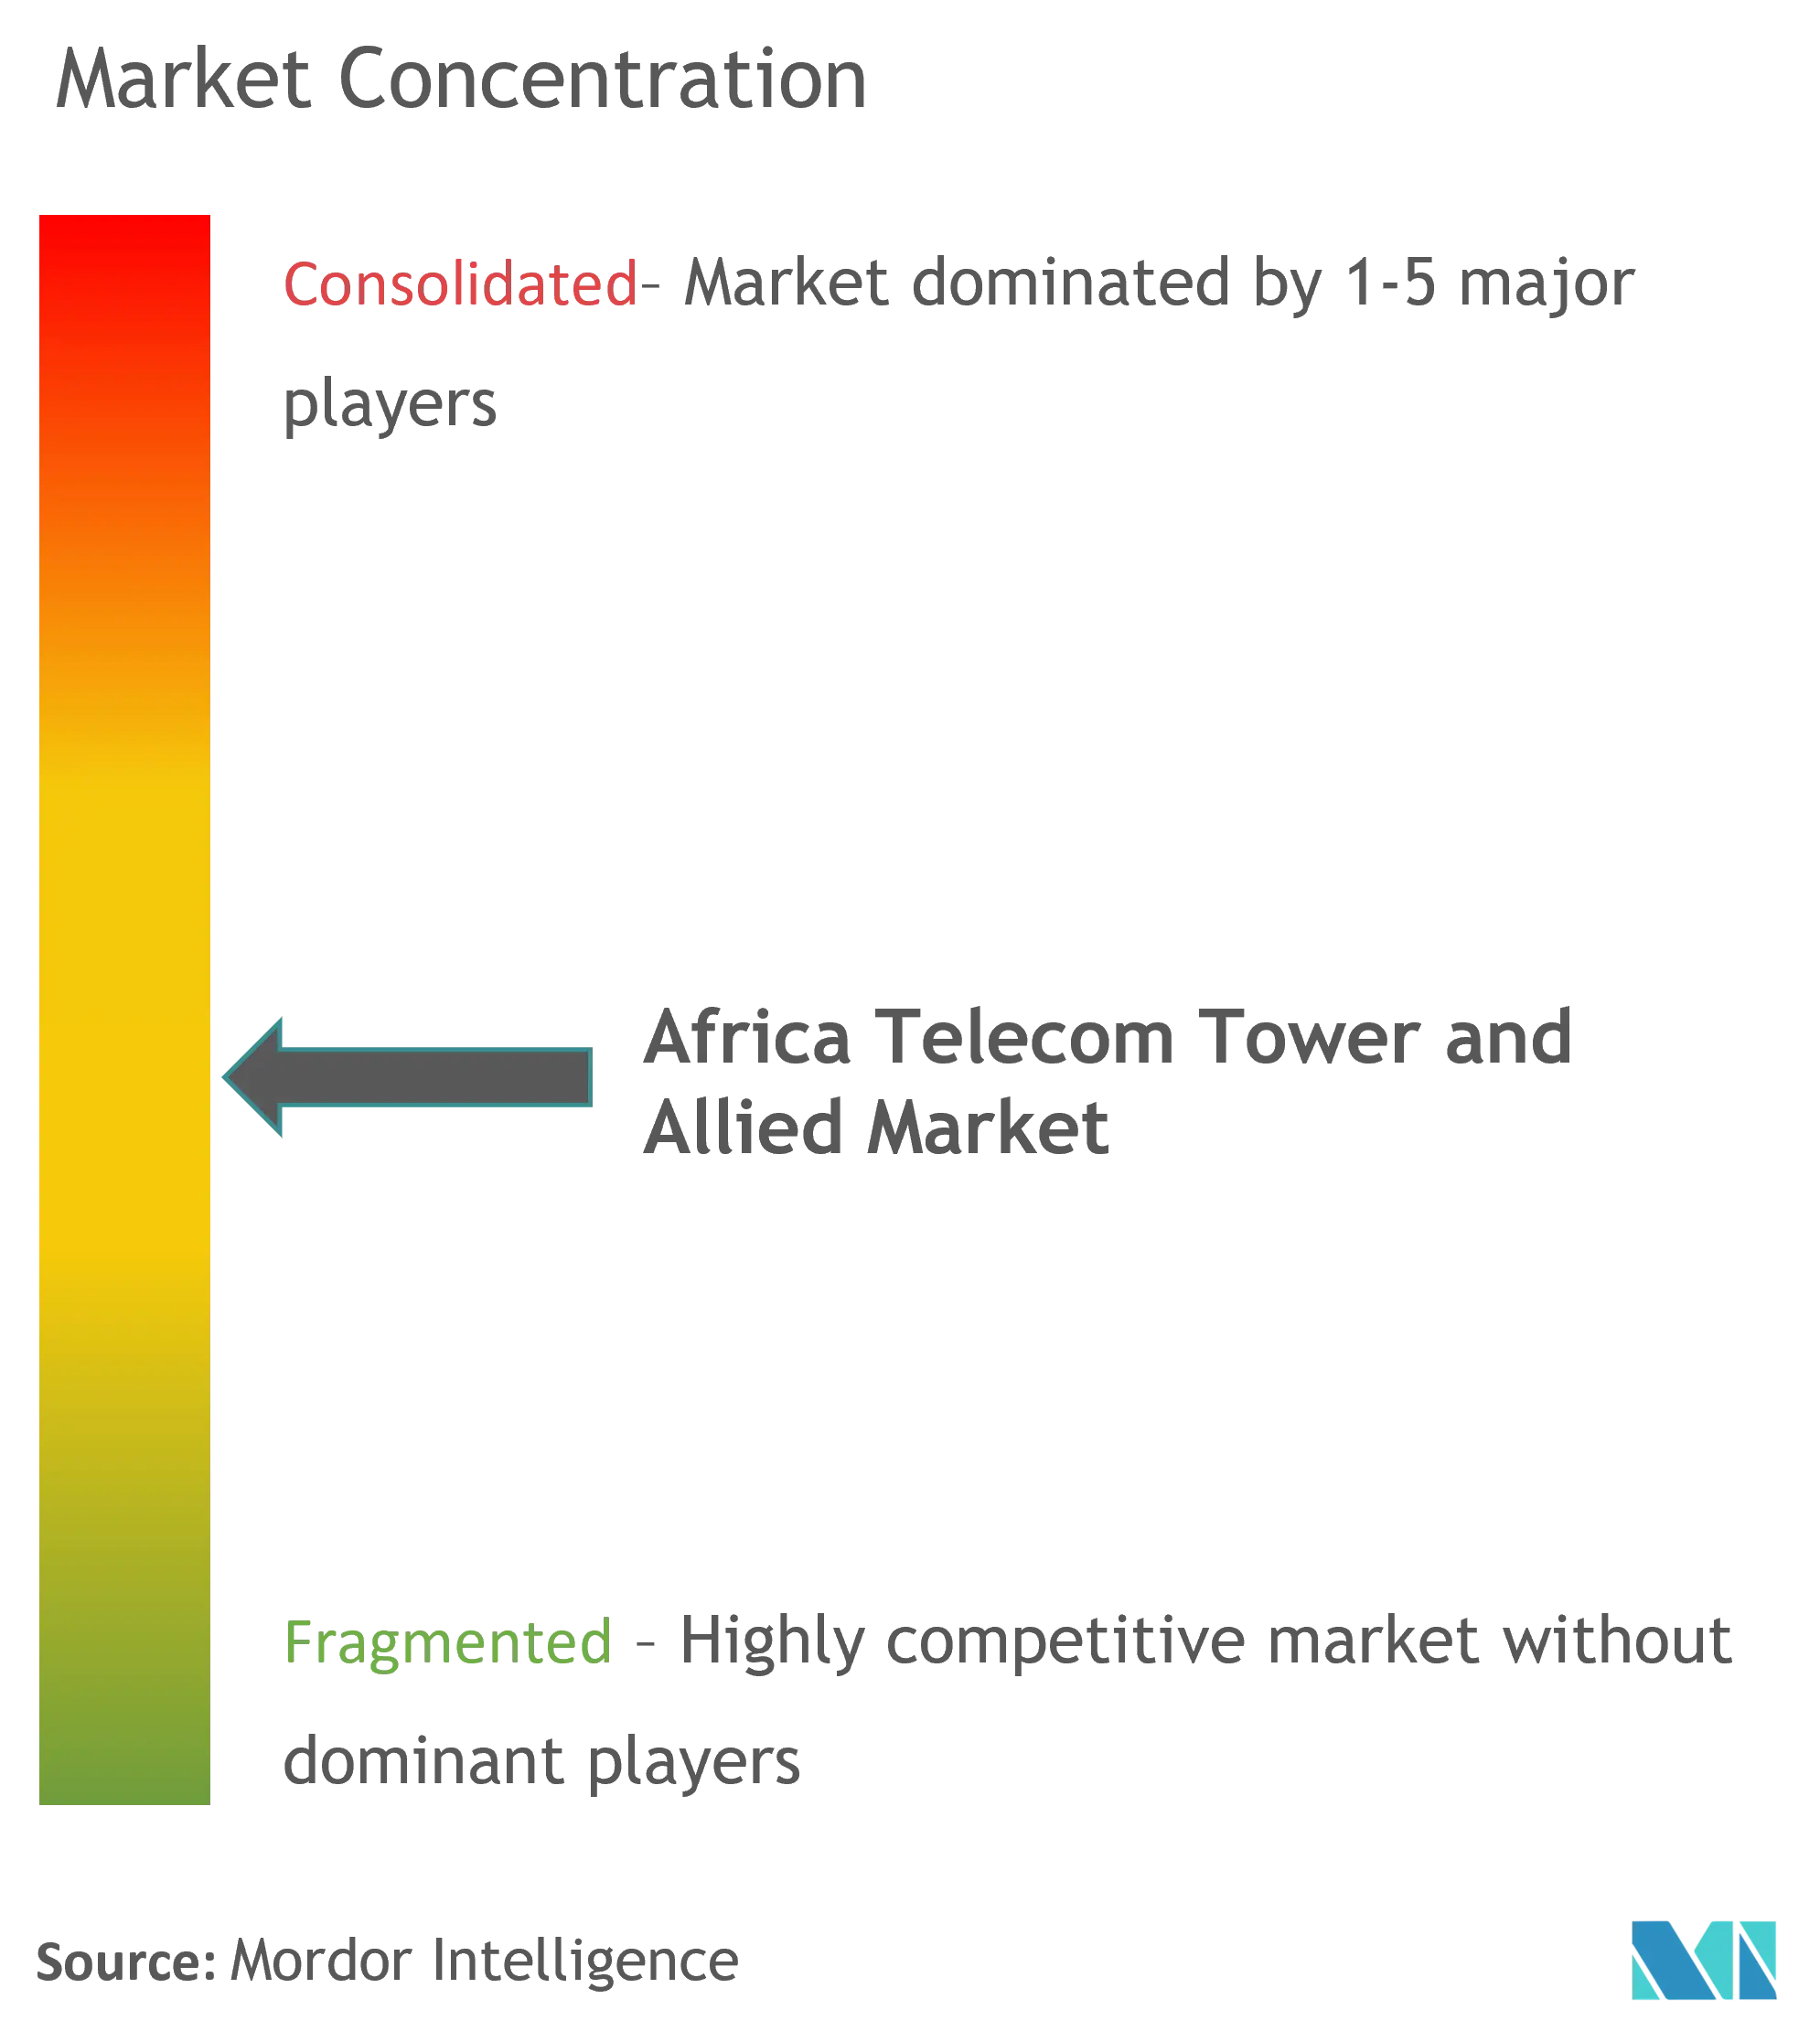 Africa Telecom Towers and Allied Market Concentration